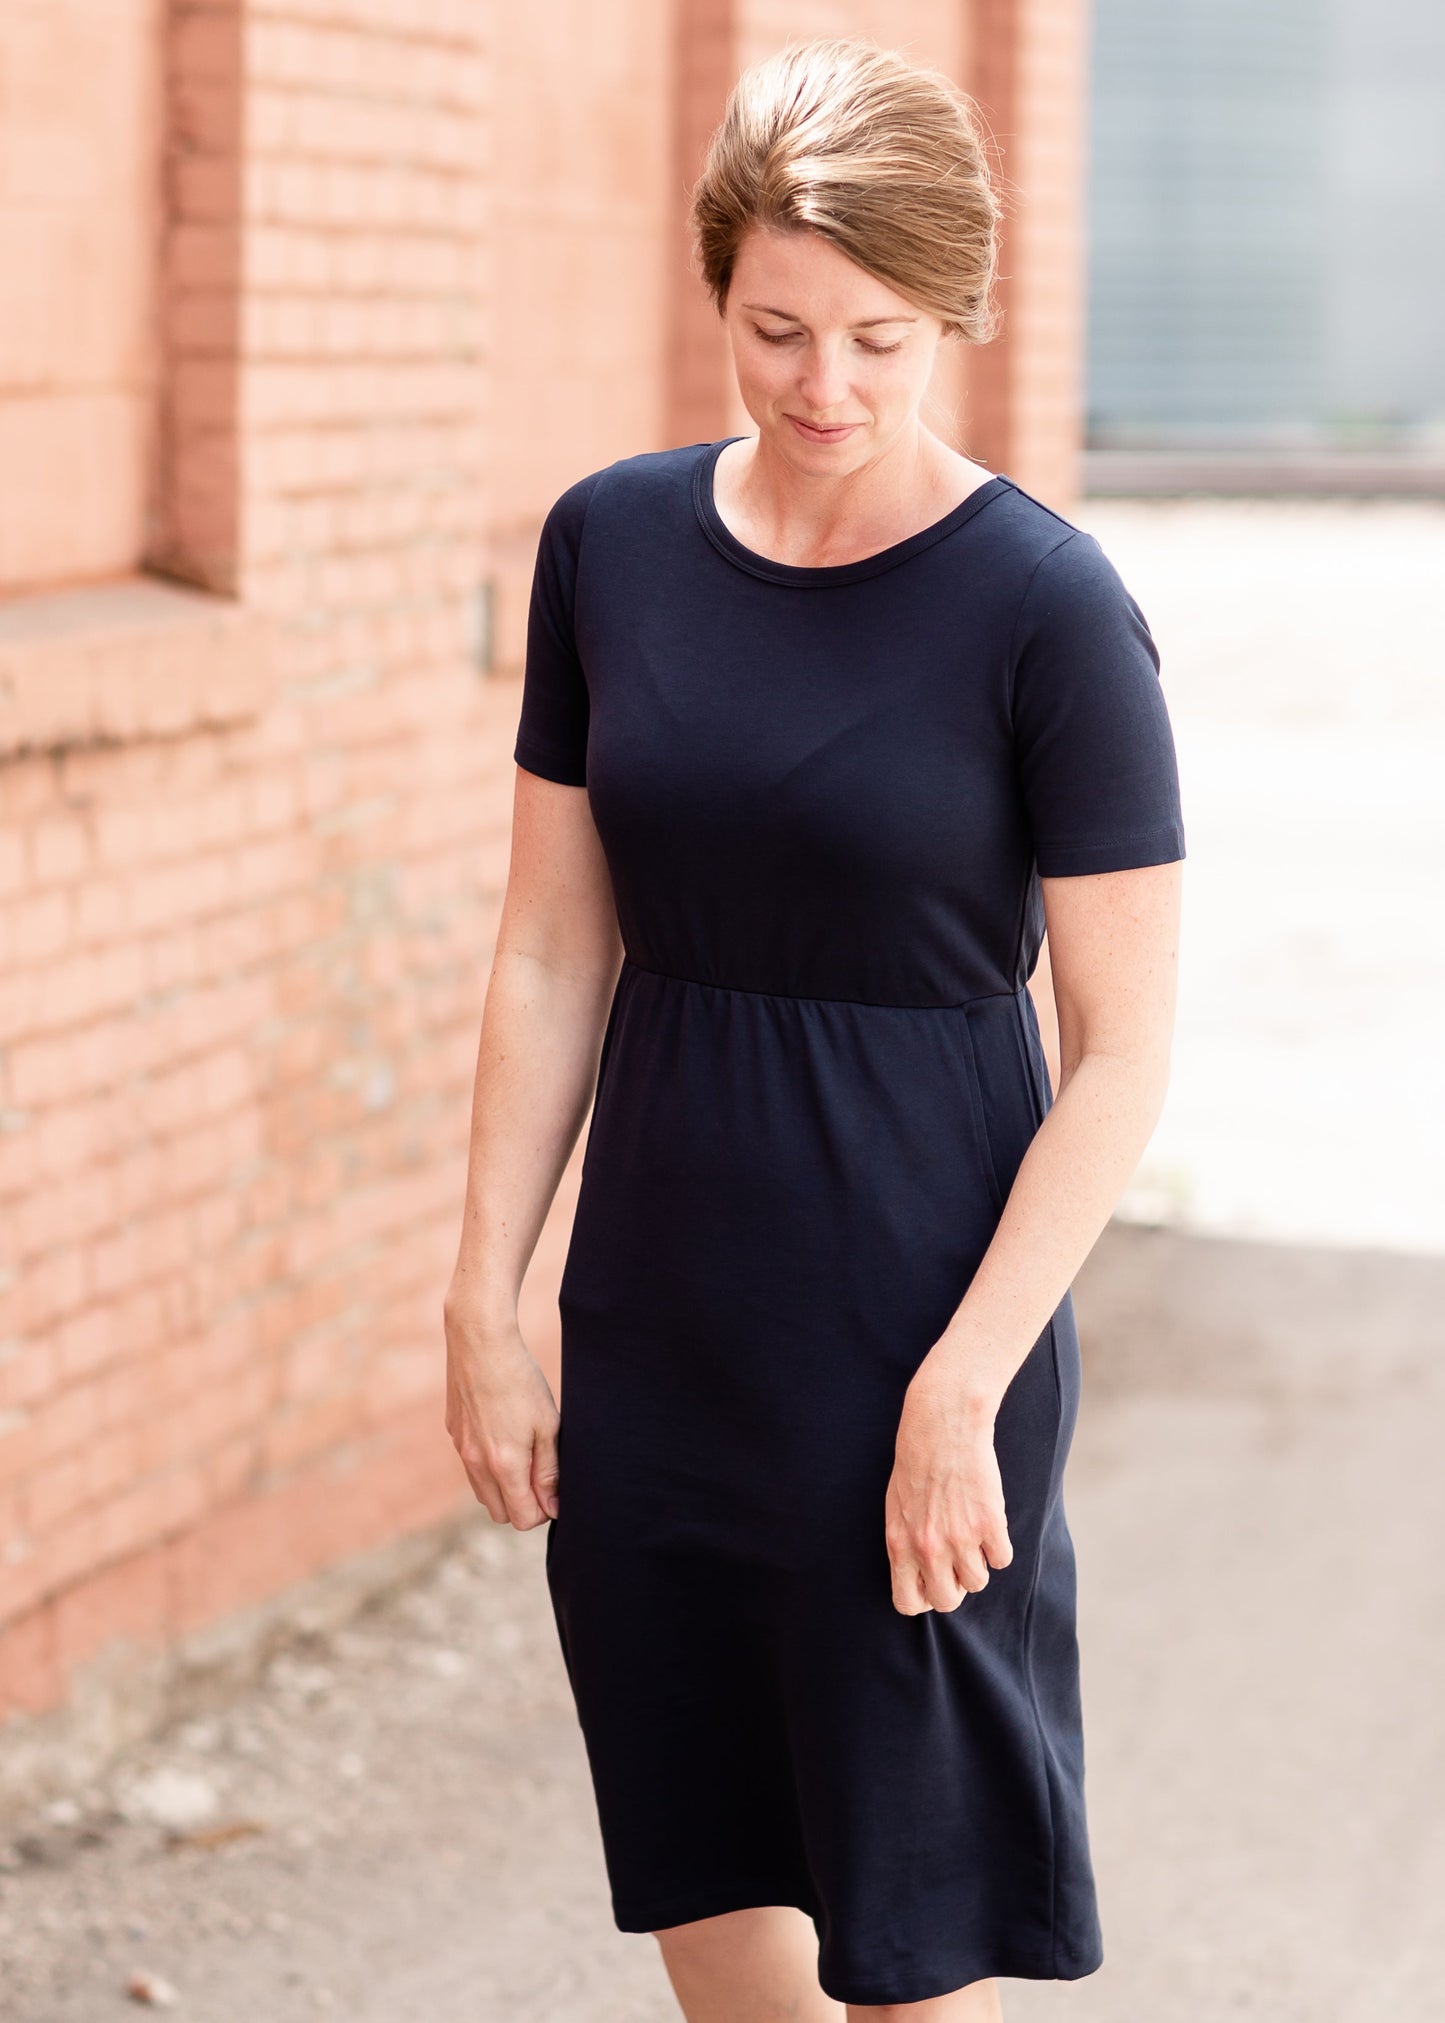 Meet Kristen. This Short sleeve Midi Dress was designed in-house and definitely isn't your typical cotton midi dress! This classic style is crafted with quality fabrics and needs no slip. The elastic waist and longer, short sleeves are extremely flattering and feminine. You will also love the placement of the two front pockets as well, this small patch style pocket hits just right!